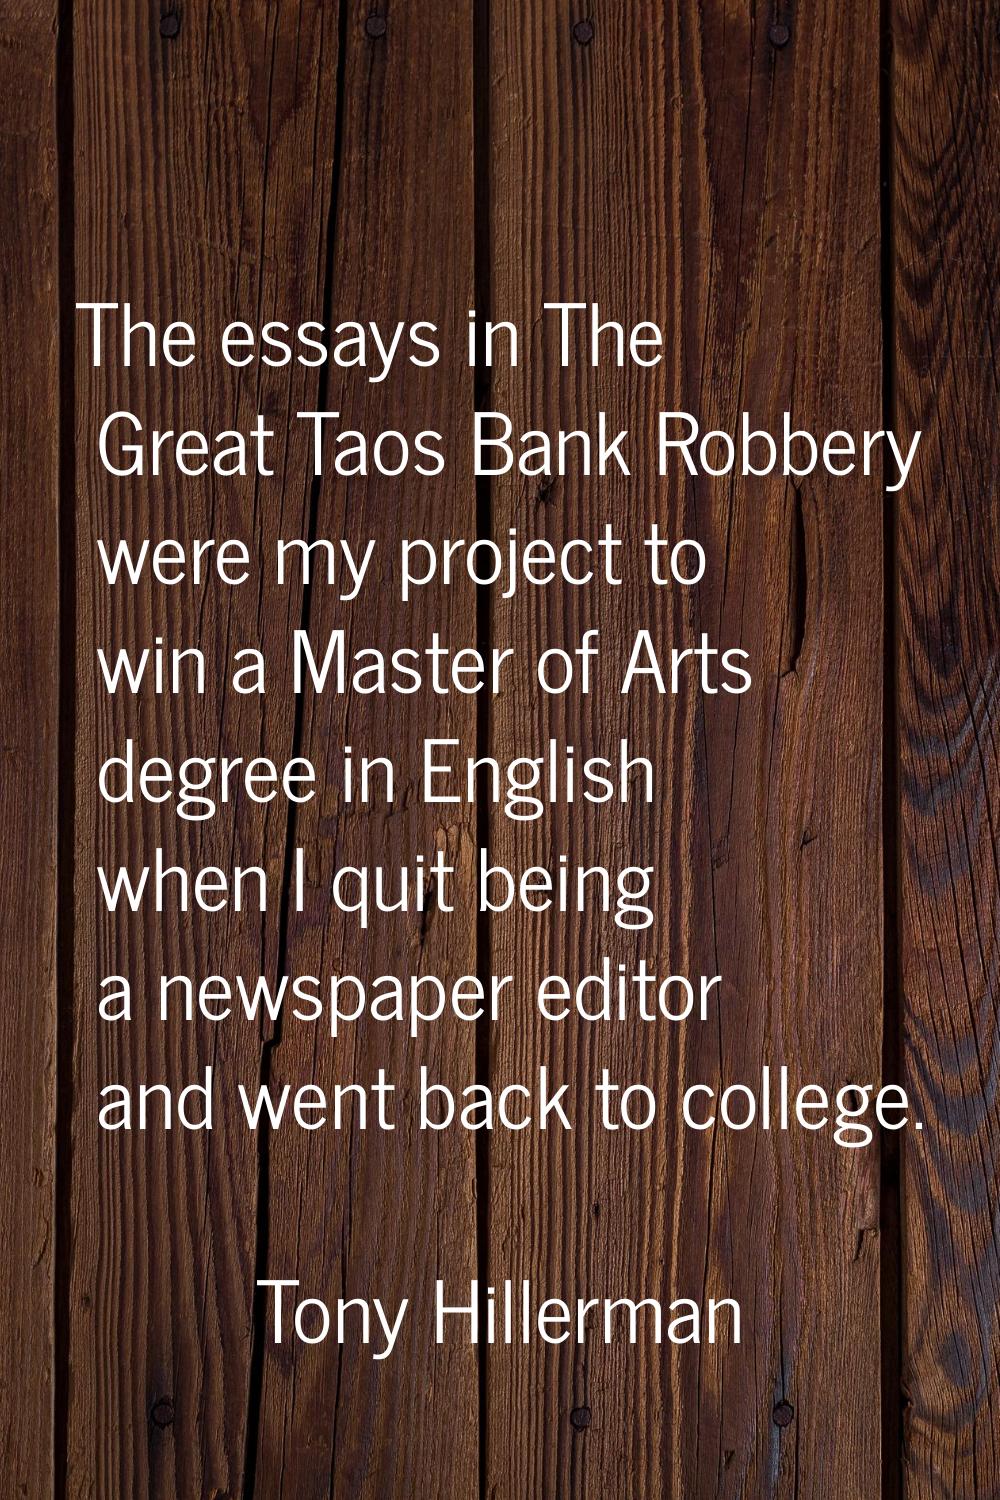 The essays in The Great Taos Bank Robbery were my project to win a Master of Arts degree in English